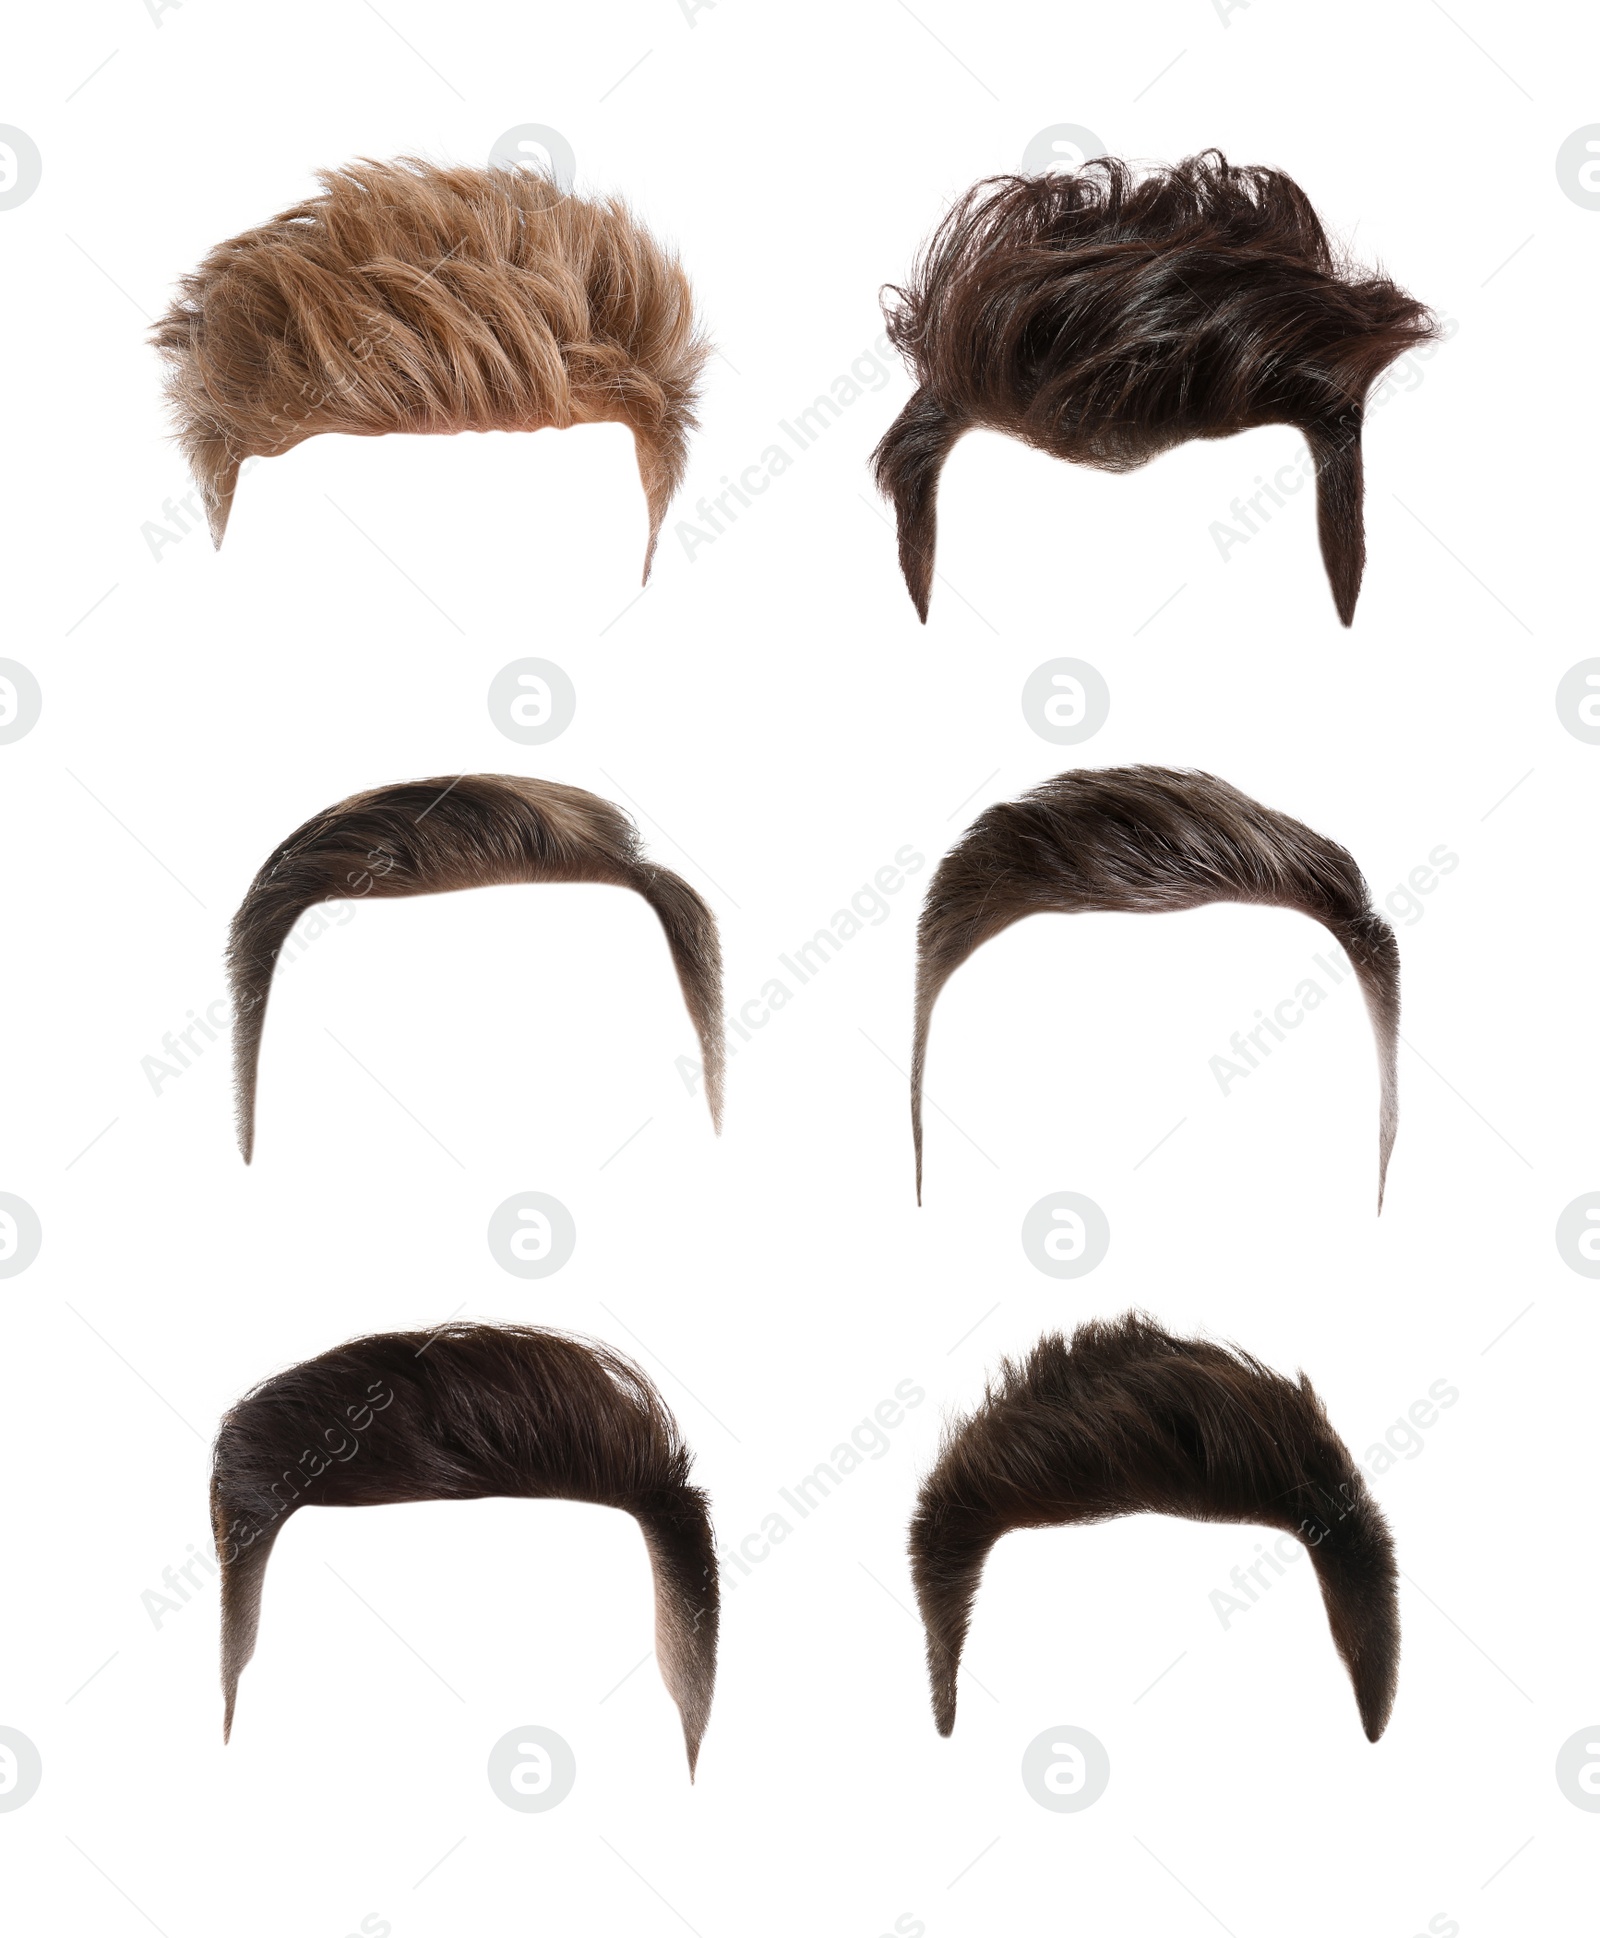 Image of Fashionable men's hairstyles isolated on white, collage. Images for design